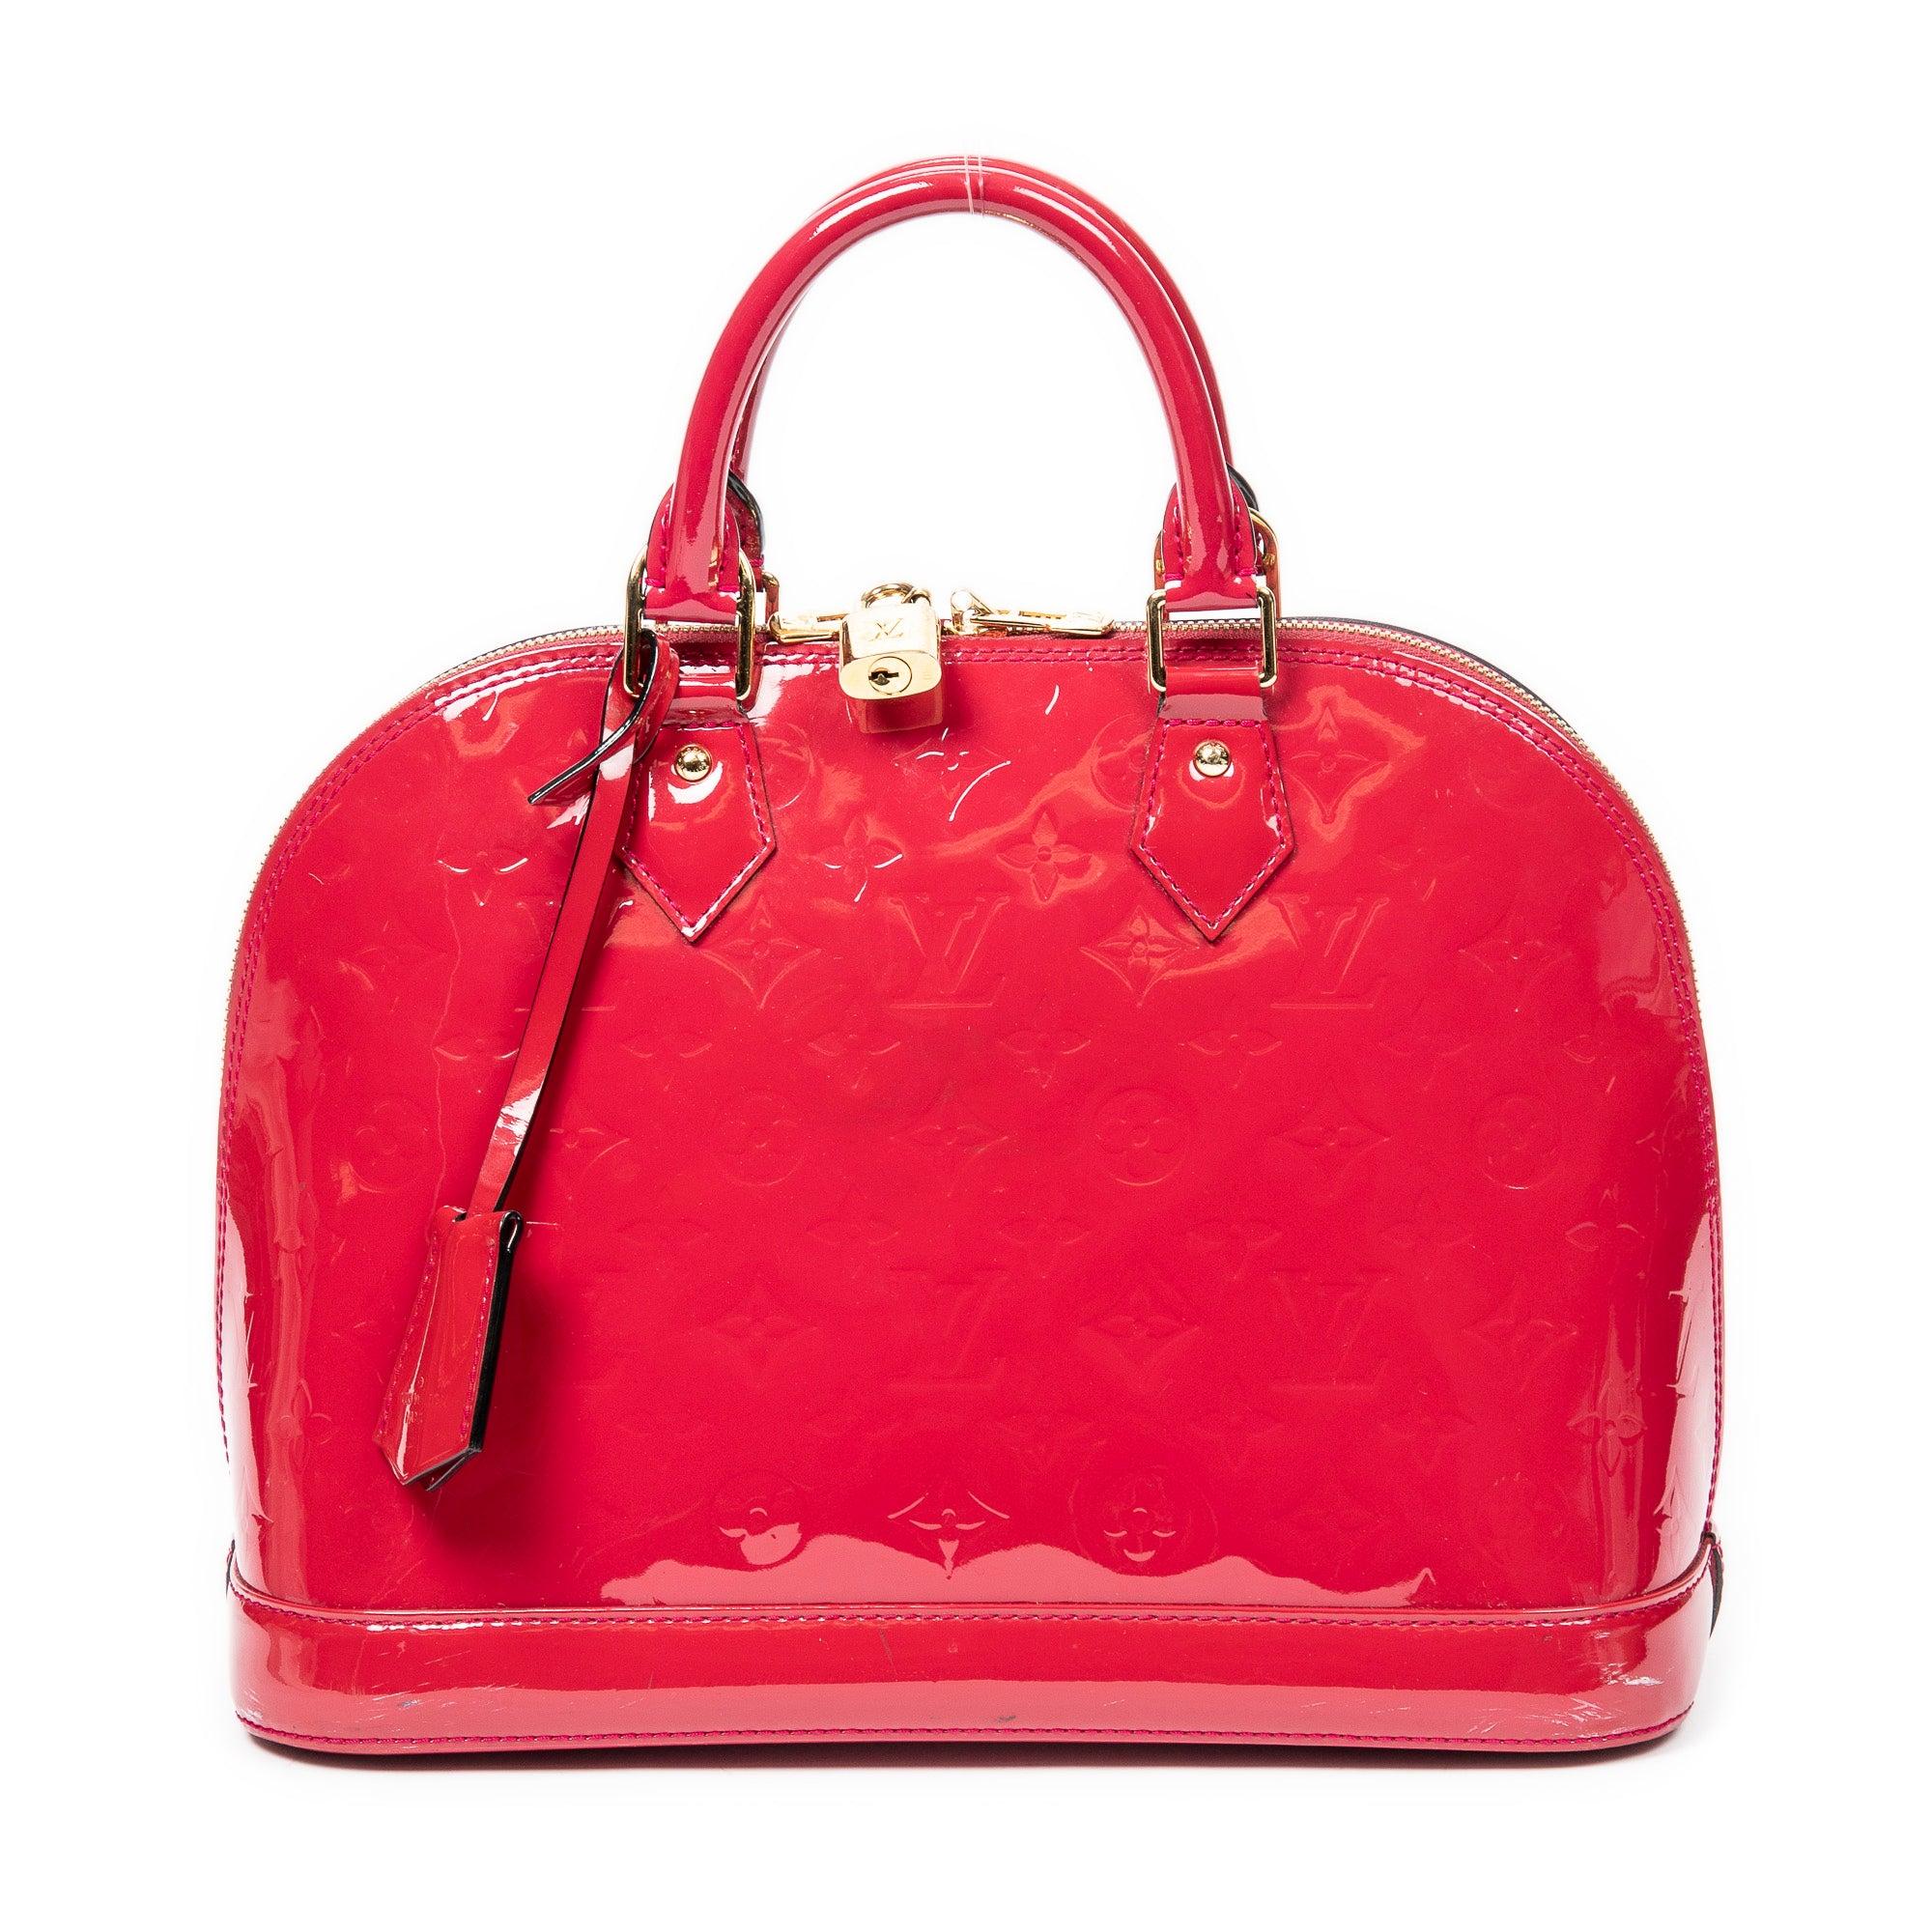 Louis Vuitton Alma Pm in Red